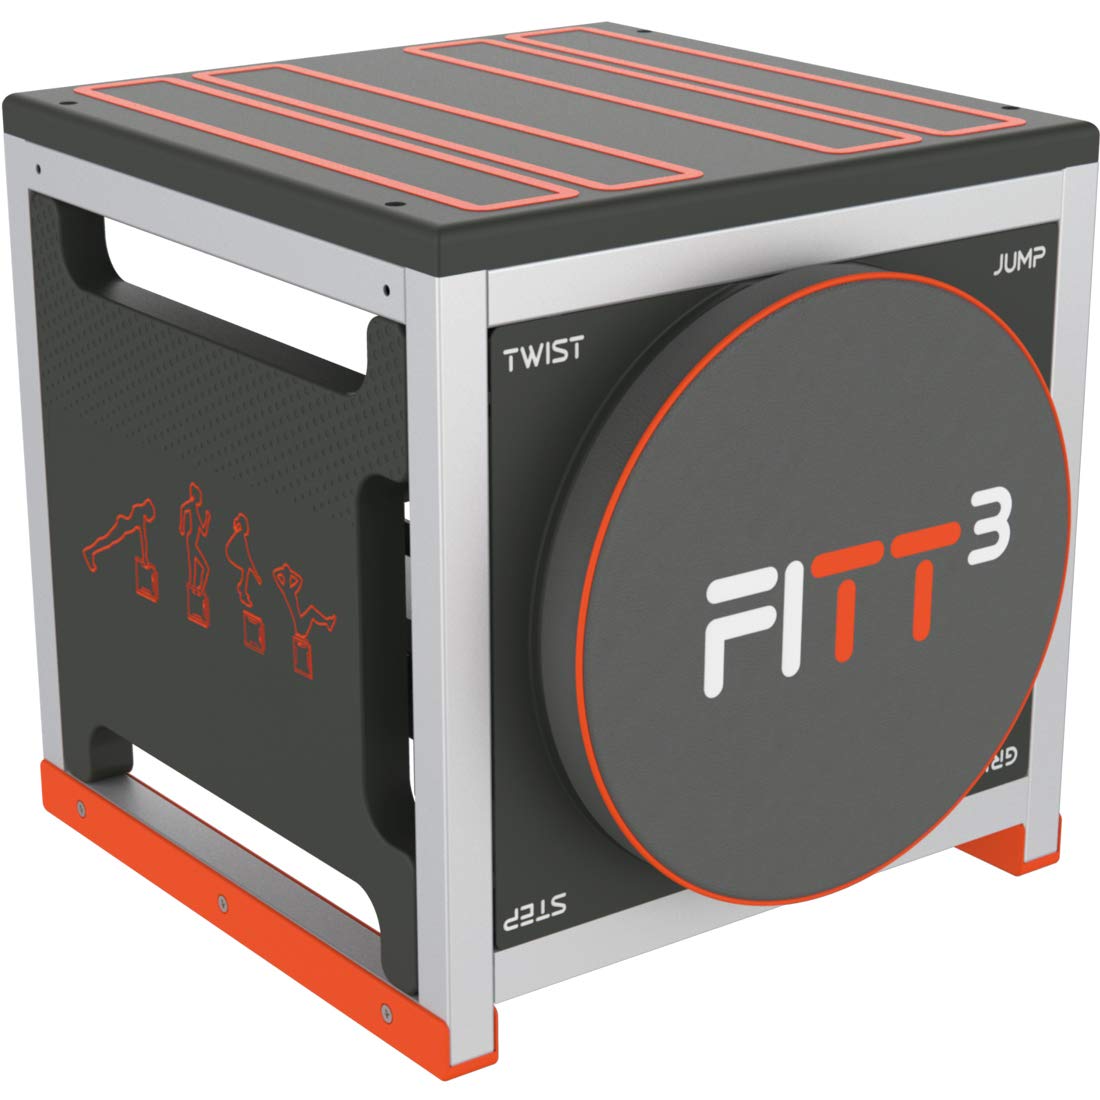 New Image Unisexs FITT Cube Total Body Workout High Intensity Interval Training Machine Accent Color Varies